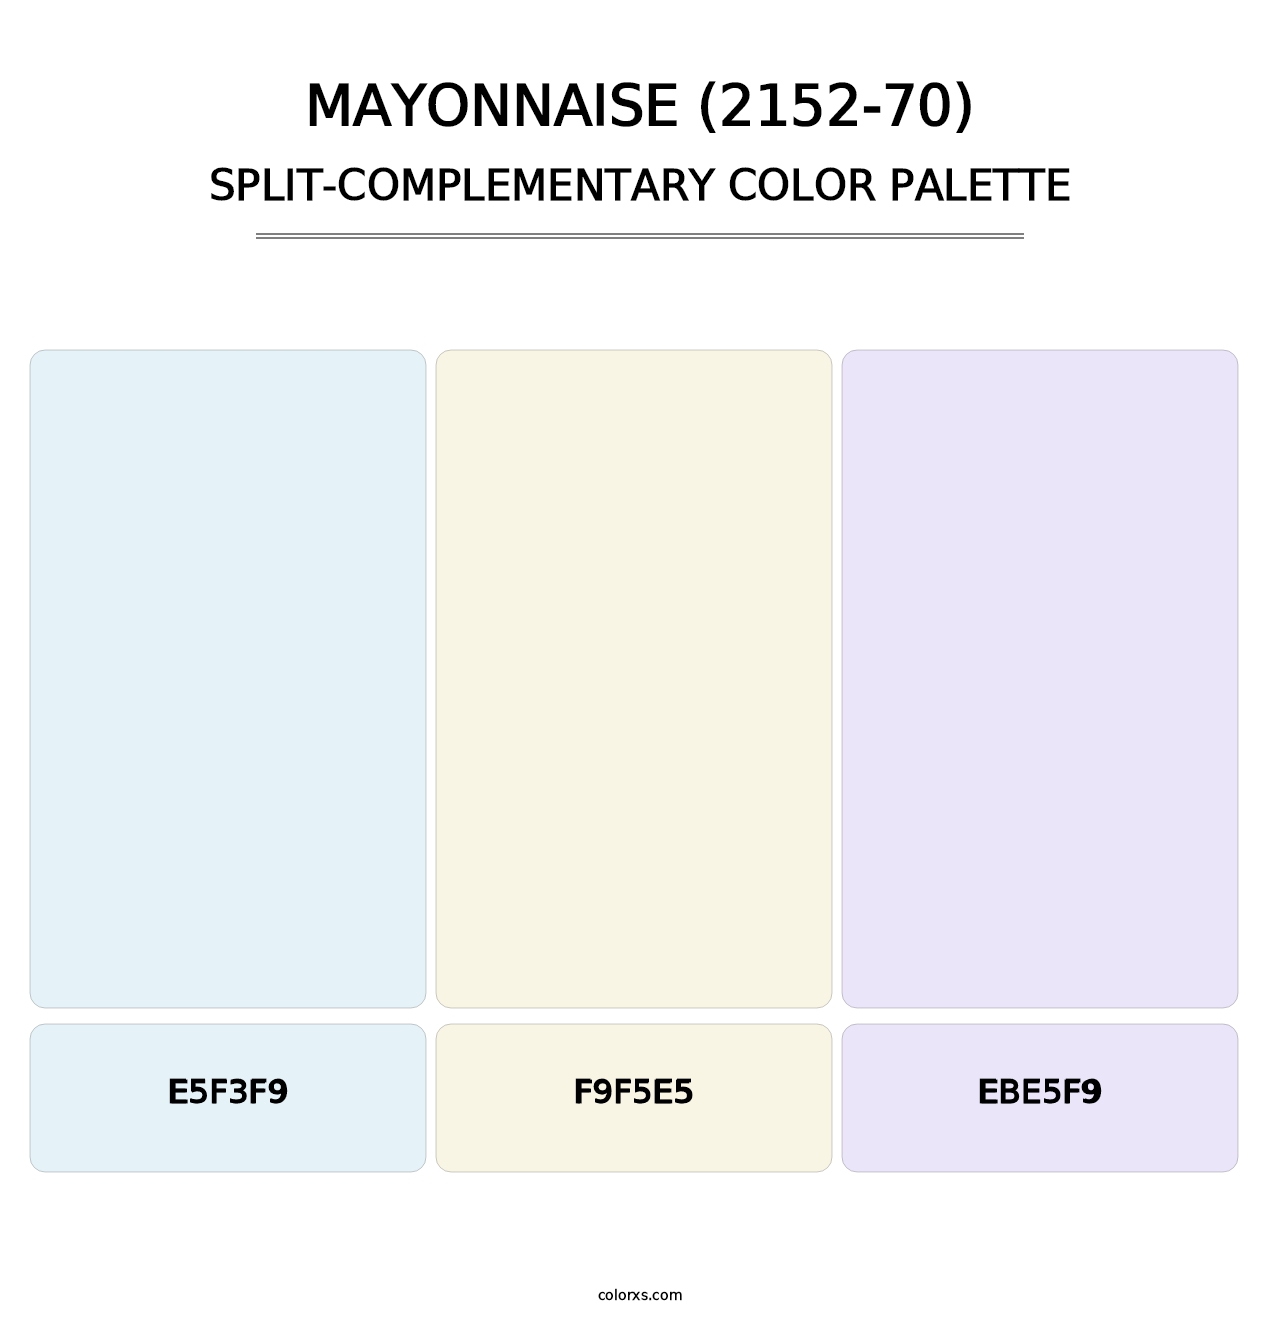 Mayonnaise (2152-70) - Split-Complementary Color Palette